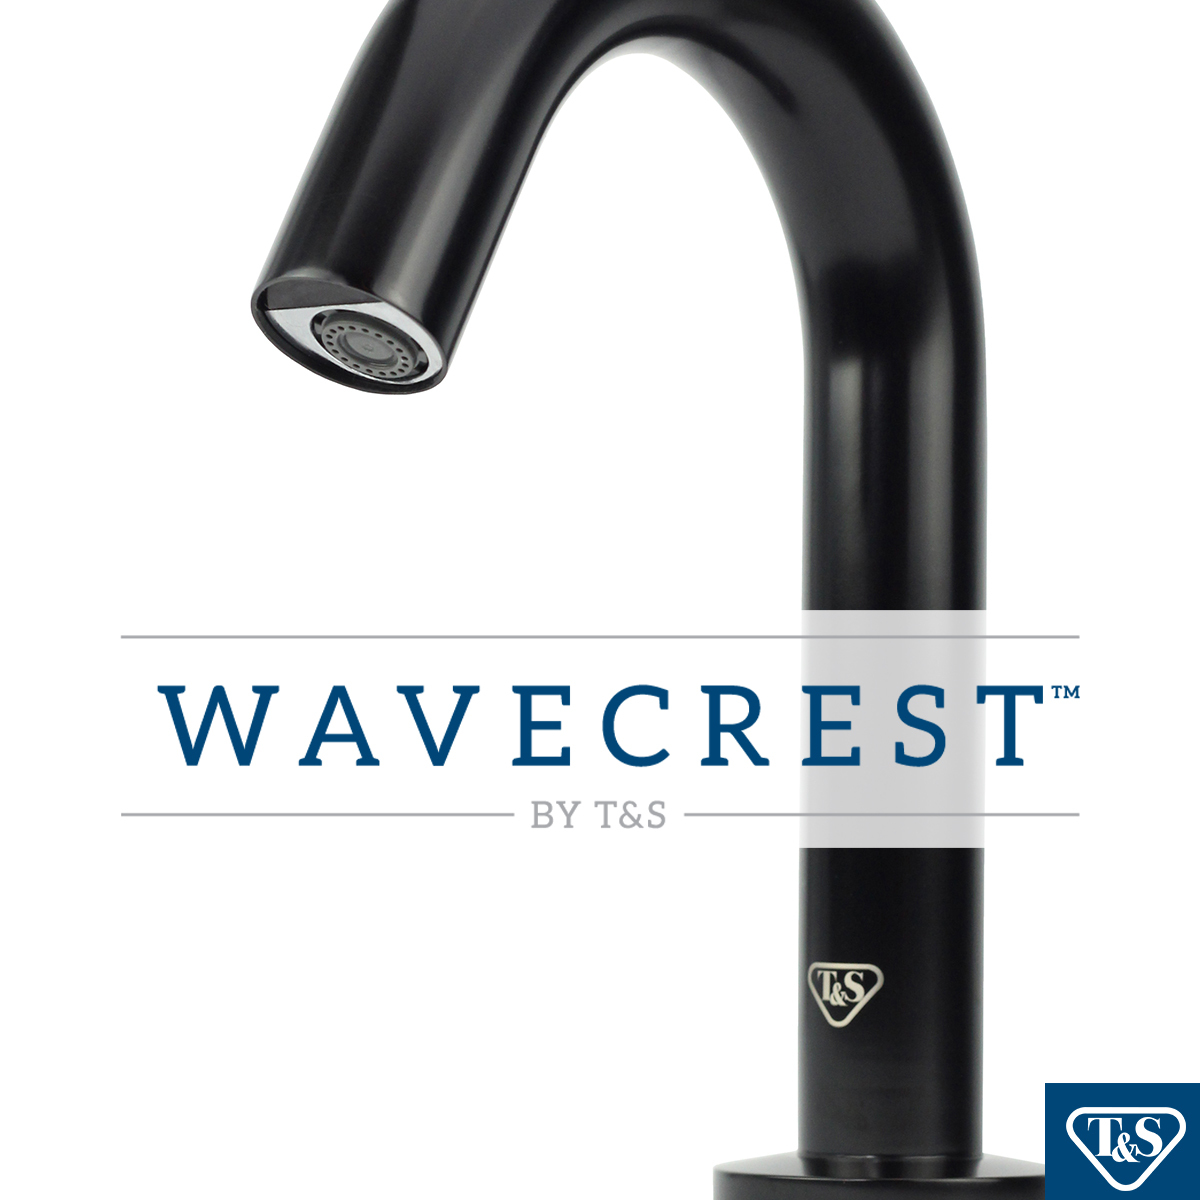 WaveCrest isn't just another sensor faucet; it's an investment for your commercial facility. Picture an office, restaurant, or lobby adorned with this sleek design & advanced technology. Plus, it's got the durability you're accustomed to w/ T&S. bit.ly/4bFr4hd